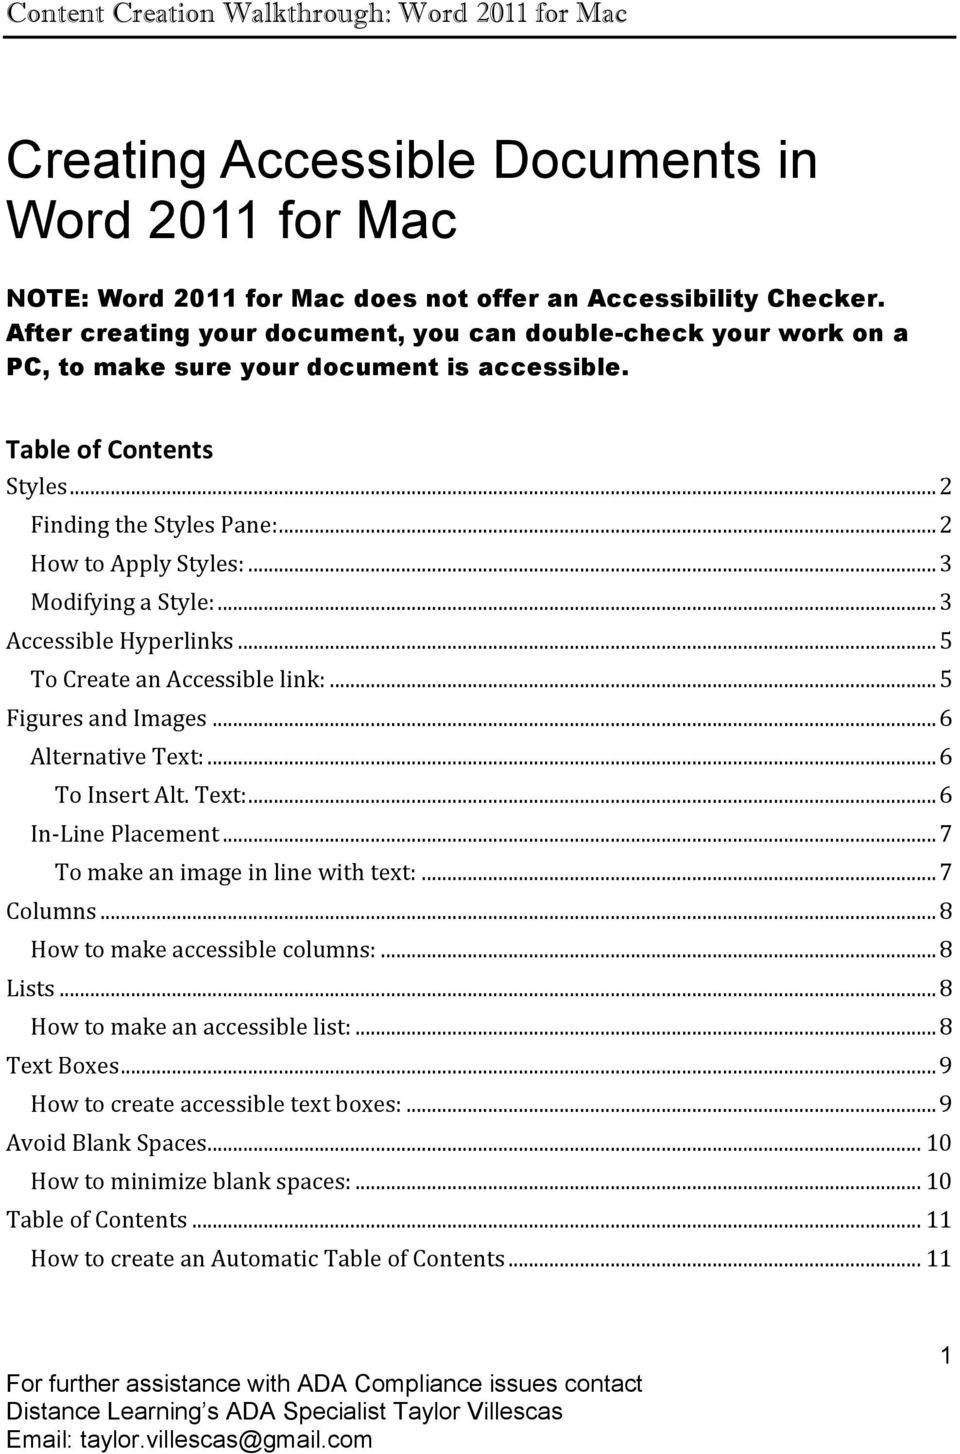 word for mac 2011 accessibility checker